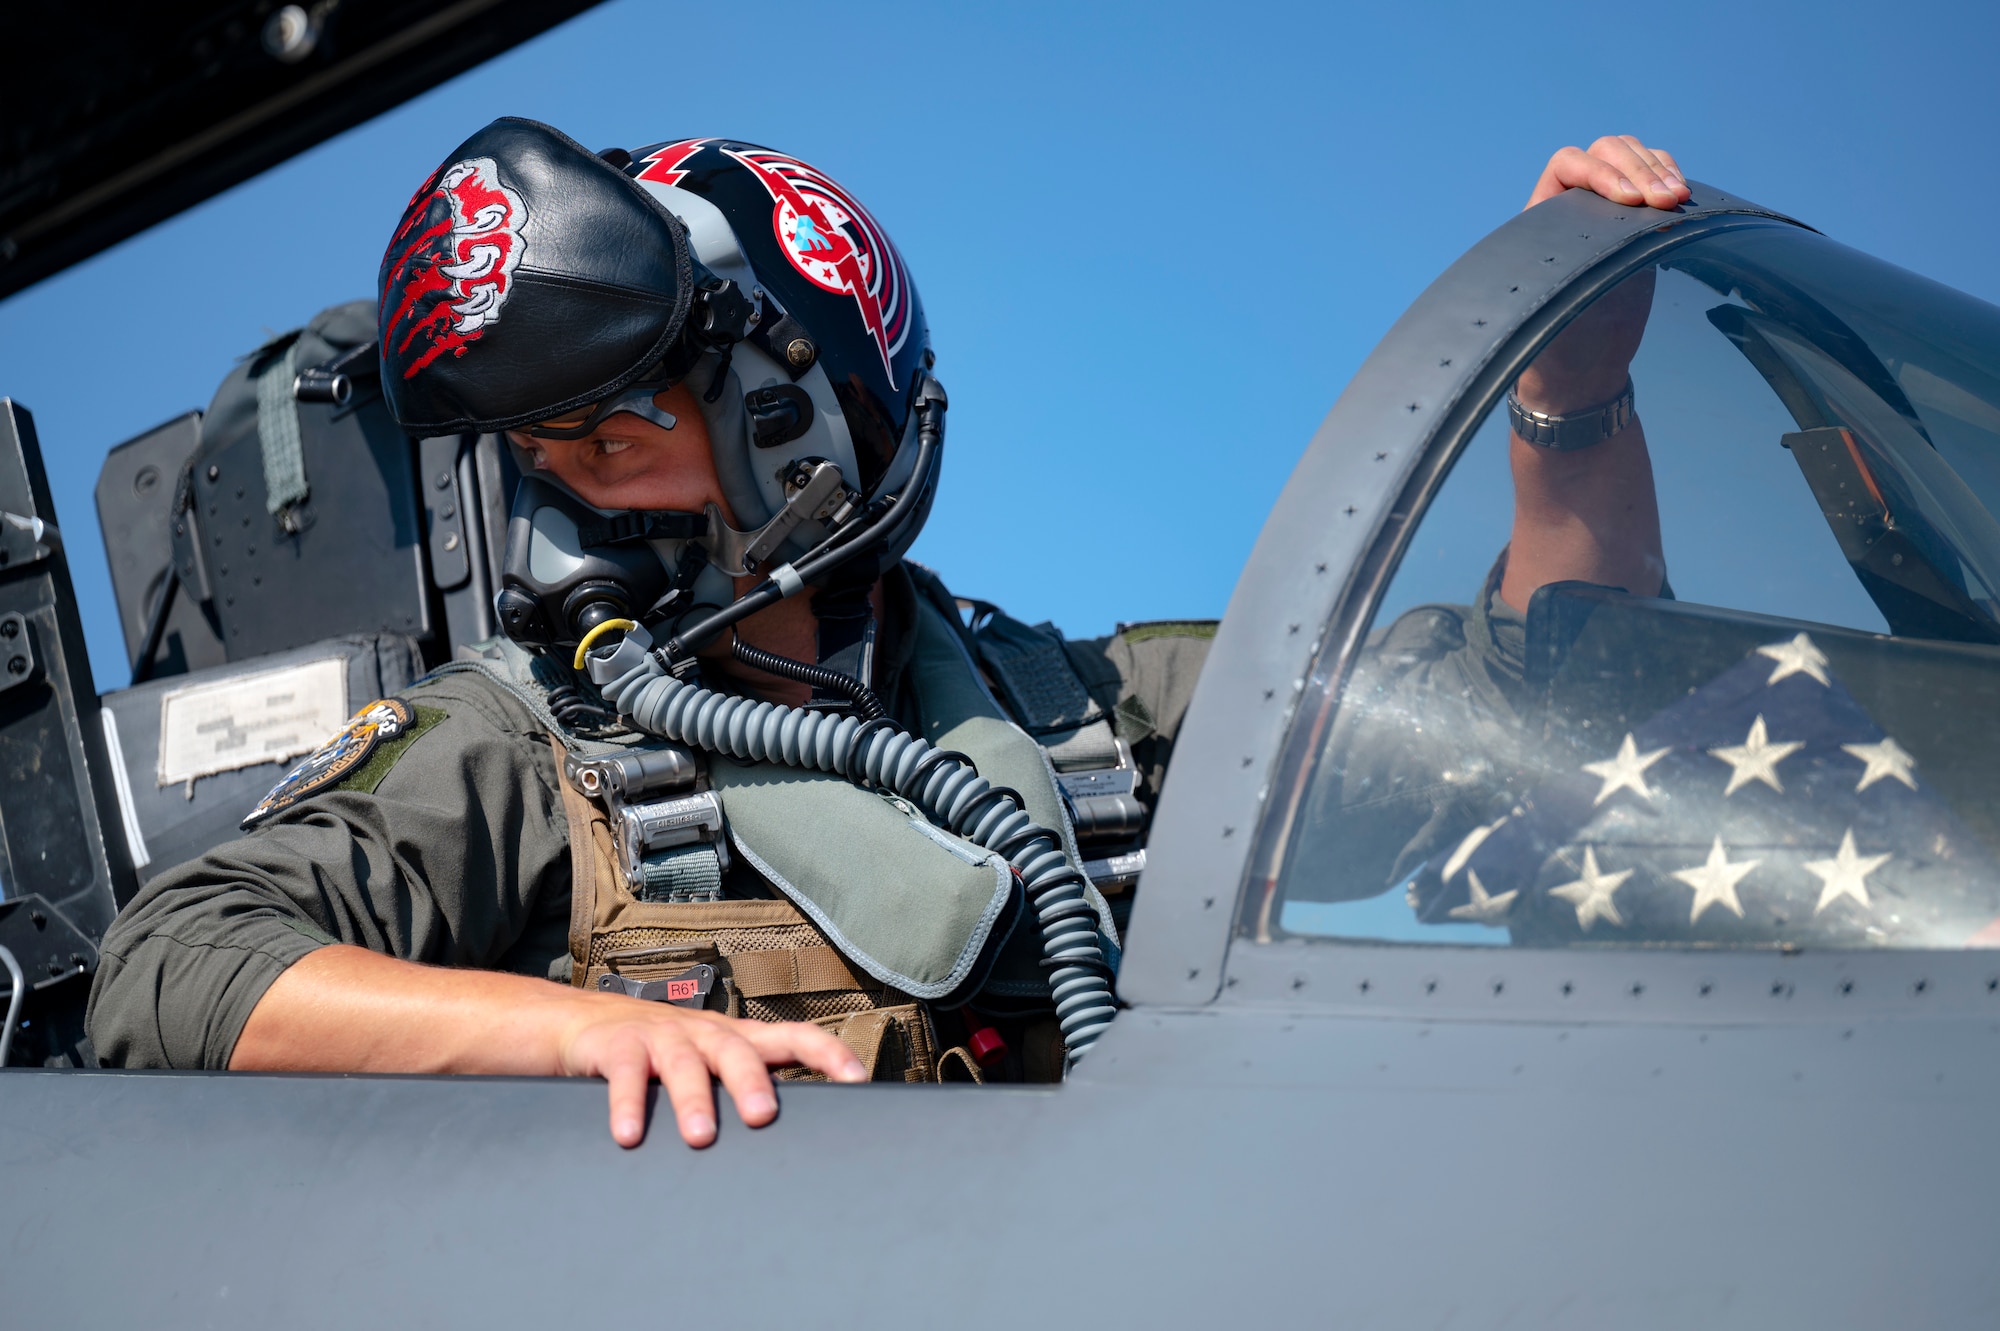 U.S. Air Force Capt. Sean Blye, an F-15E Strike Eagle pilot assigned to the 494th Fighter Squadron, from Royal Air Force Lakenheath, England, conducts pre-flight checks at Souda Air Base, Greece, July 15, 2022. Blye acted as mission flight lead while conducting flight operations from Souda AB to an undisclosed location within the U.S. Central Command area of responsibility, in an effort to exercise cross-combatant command Agile Combat Employment operations. (U.S. Air Force photo by Tech. Sgt. Rachel Maxwell)